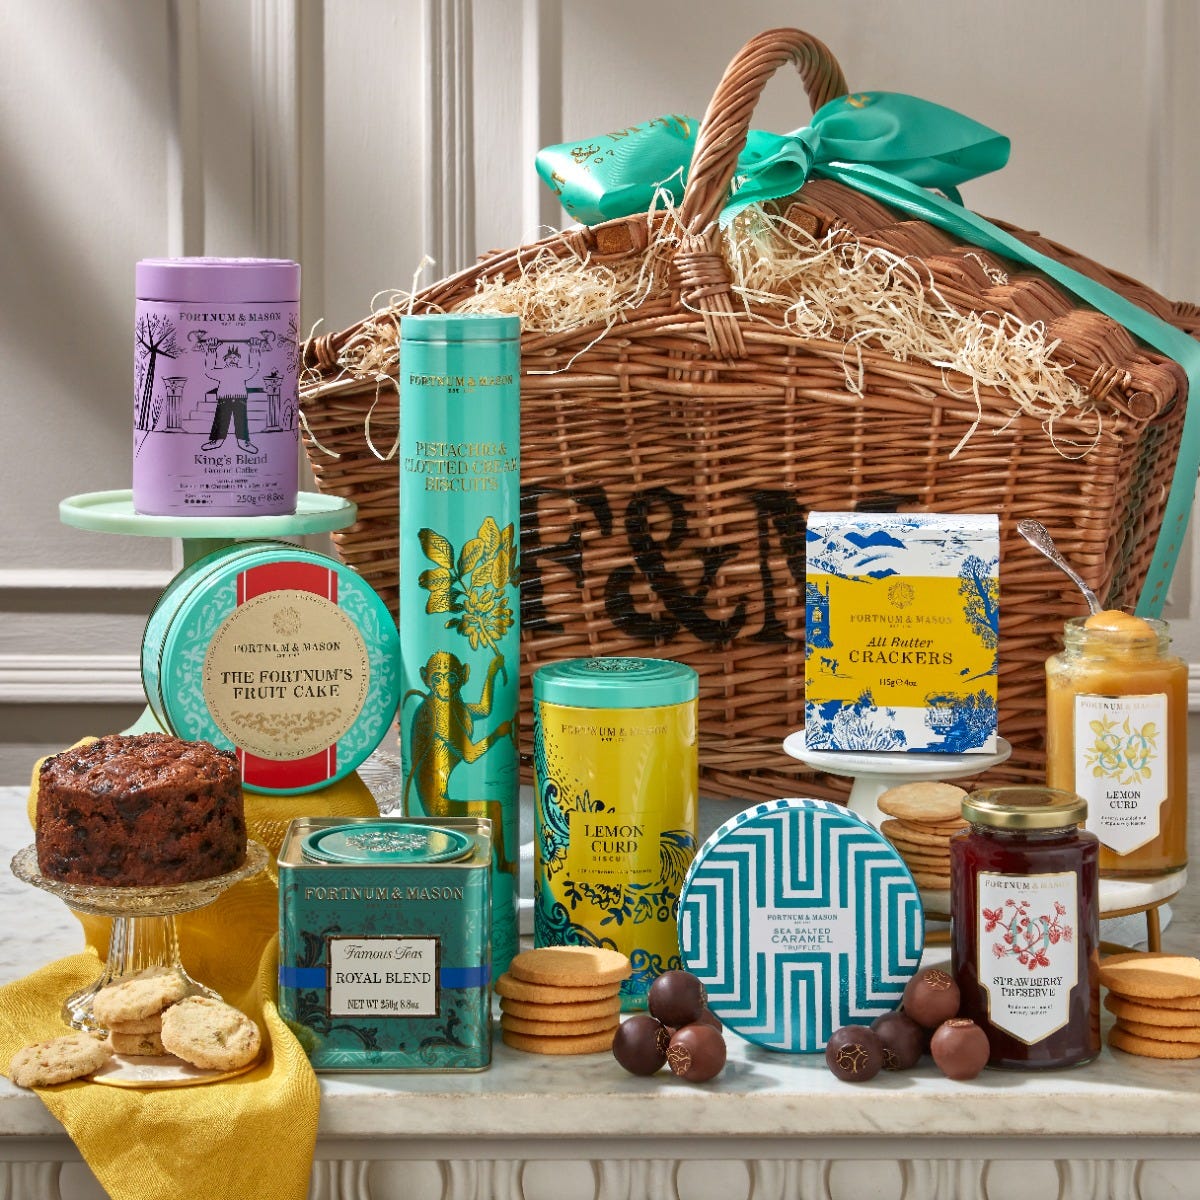 The Collection Hamper, Biscuits, Cakes, Chocolates, Teas, Fortnum & Mason